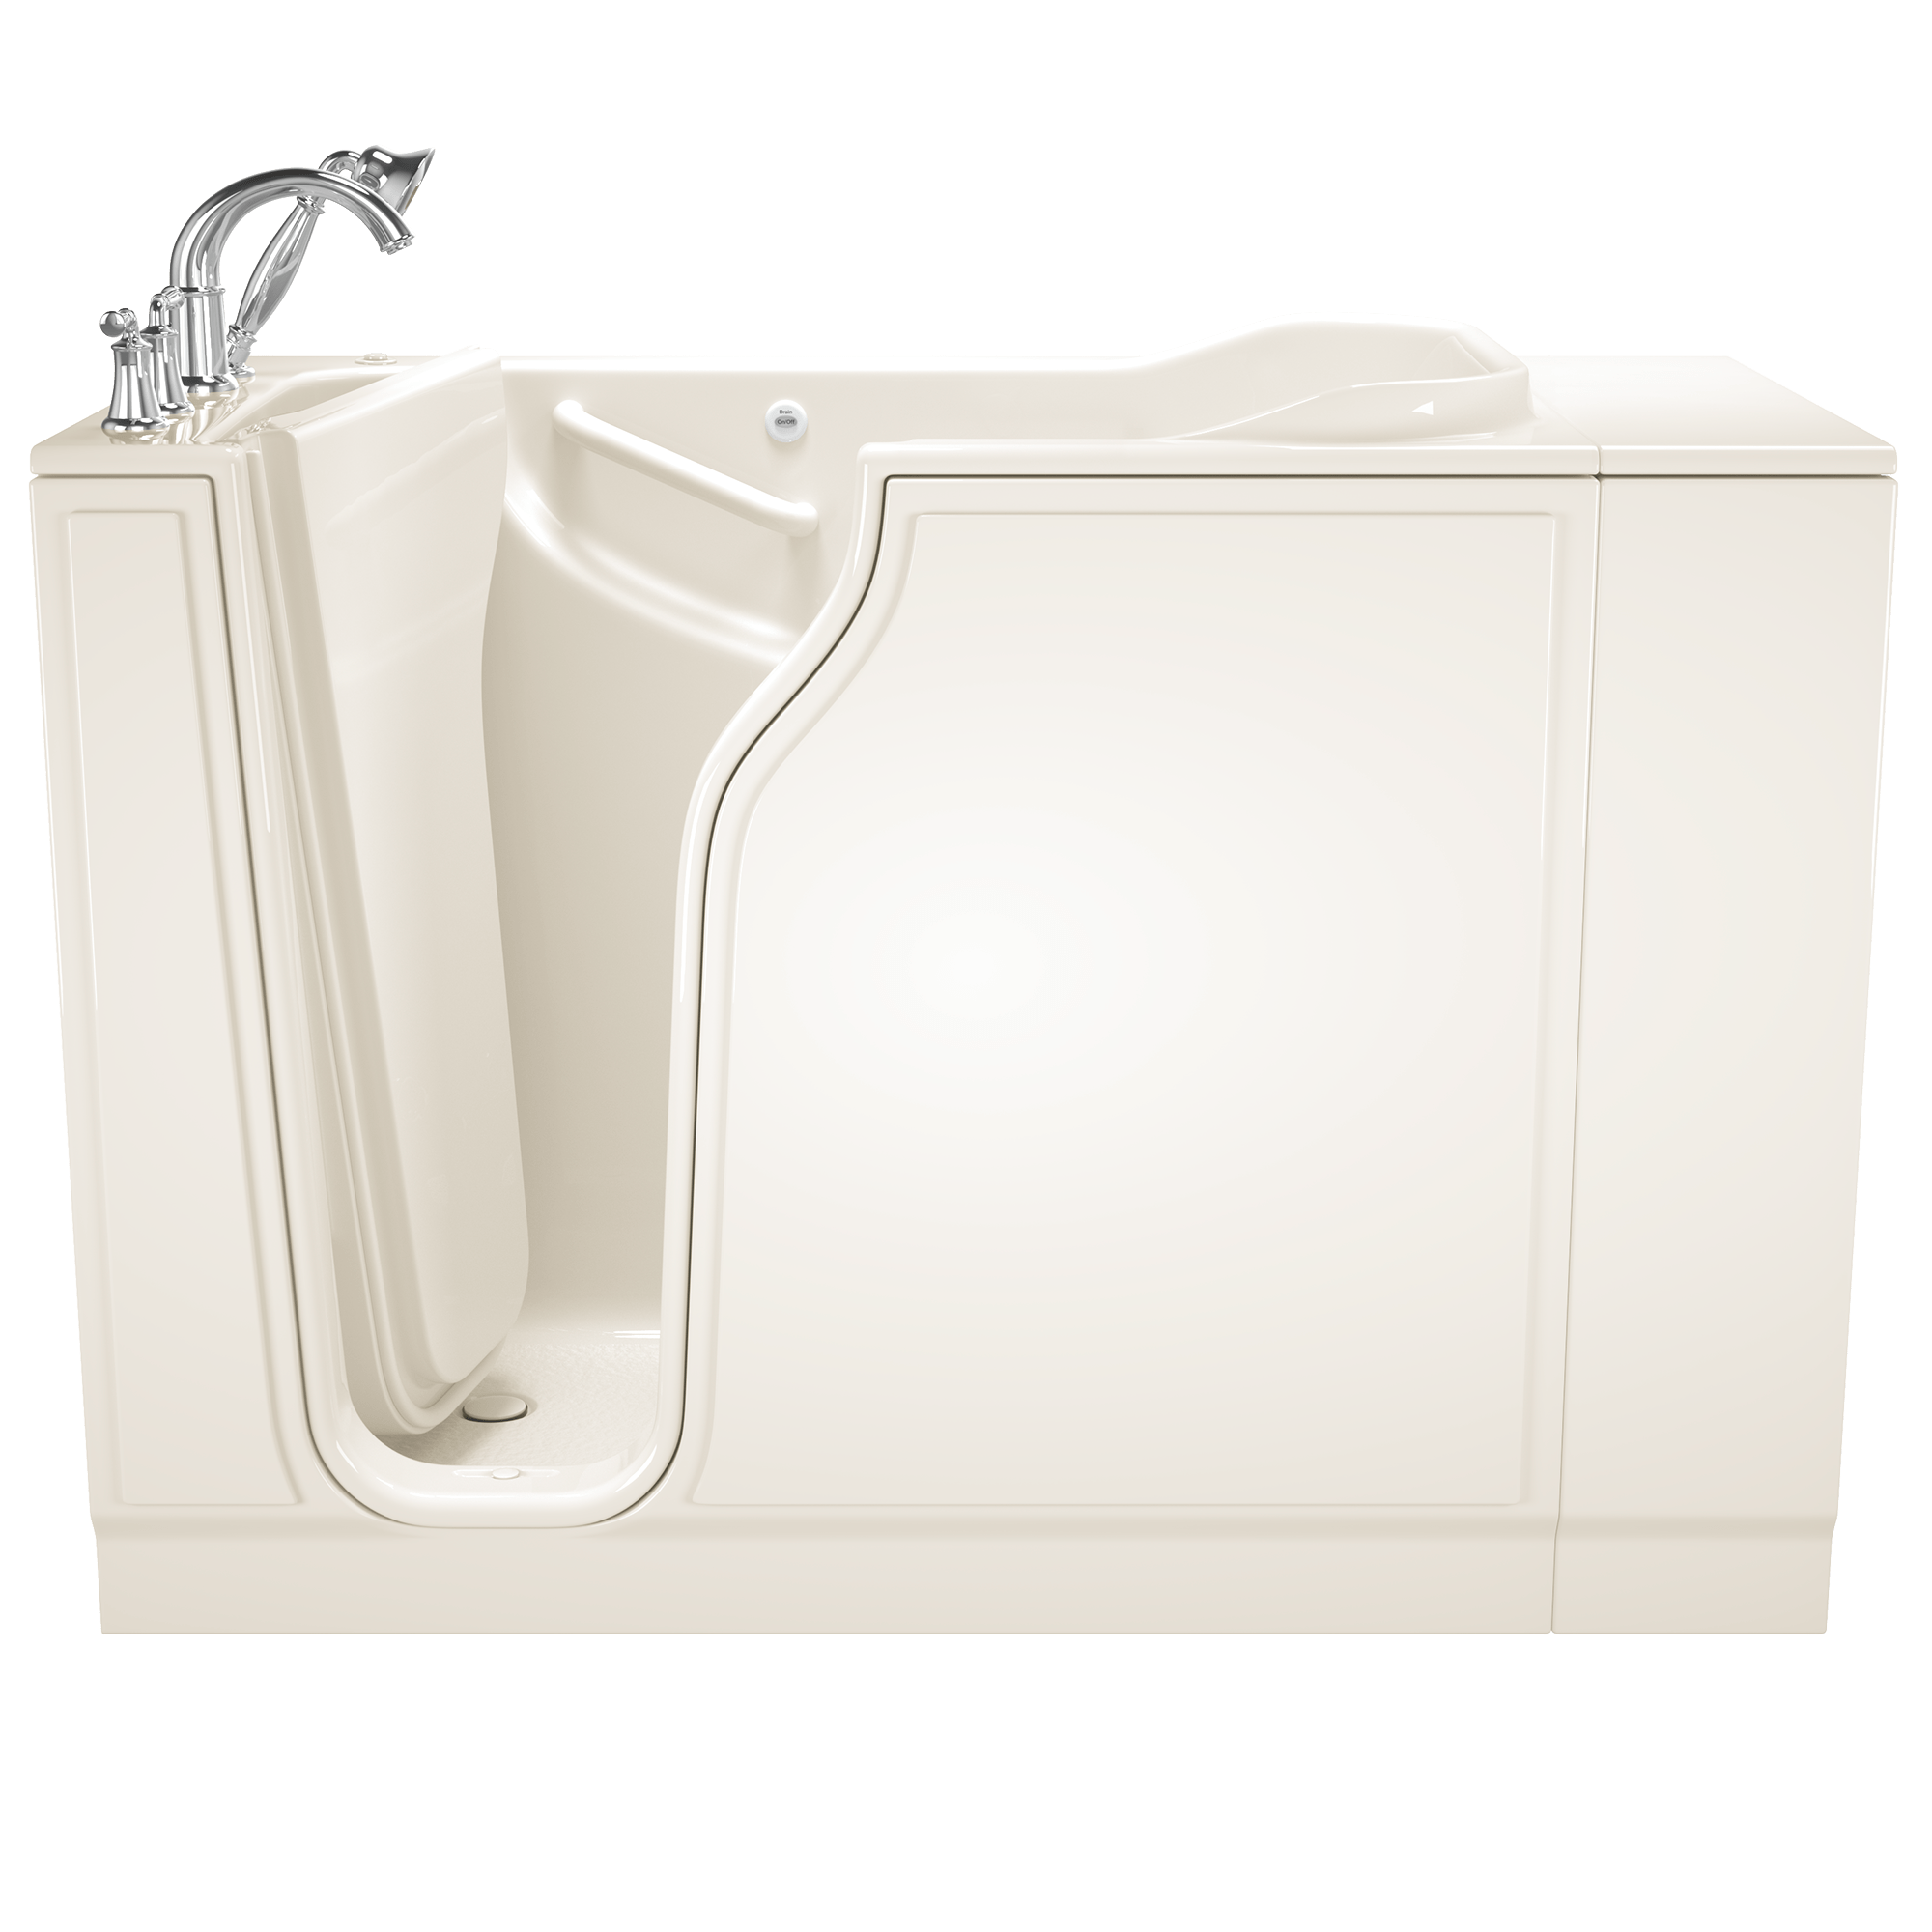 Gelcoat Value Series 30 x 52 -Inch Walk-in Tub With Air Spa System - Left-Hand Drain With Faucet